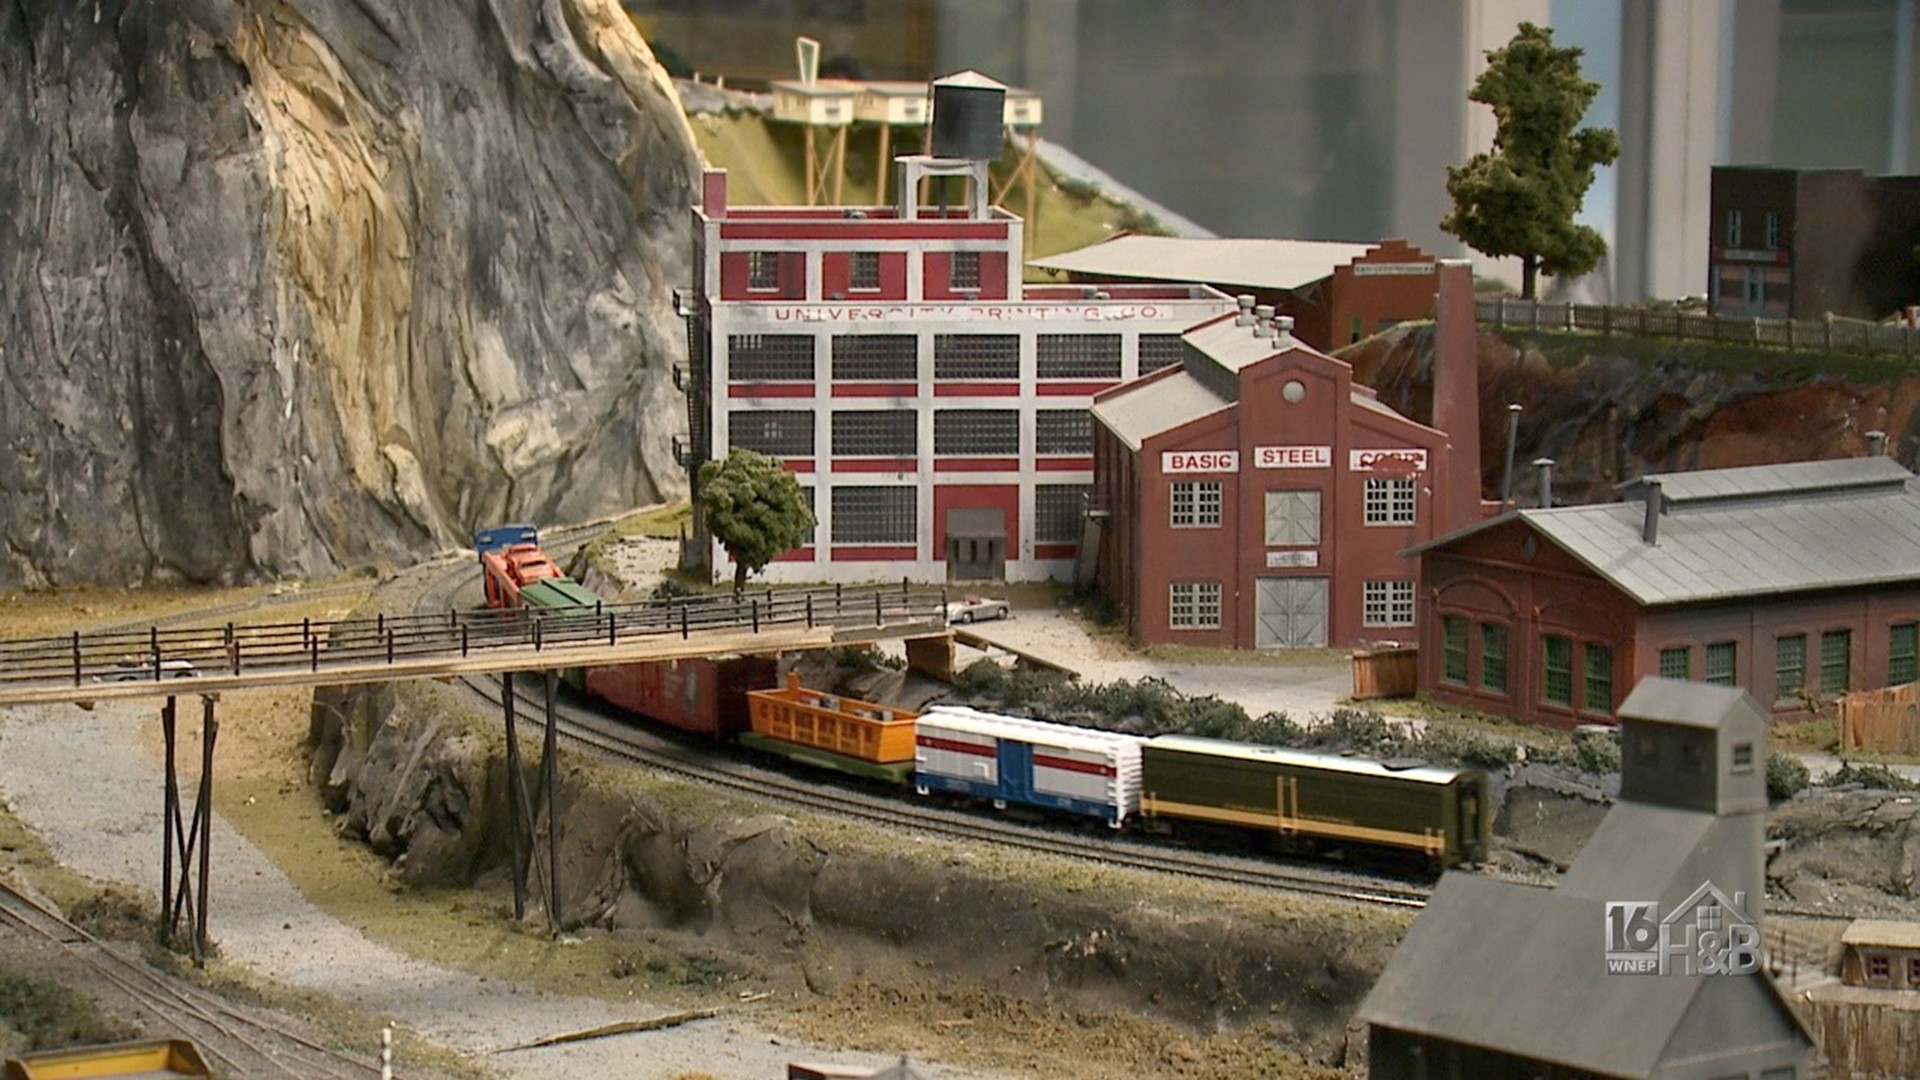 Great Tips For Storing Your Model Train/Village Display